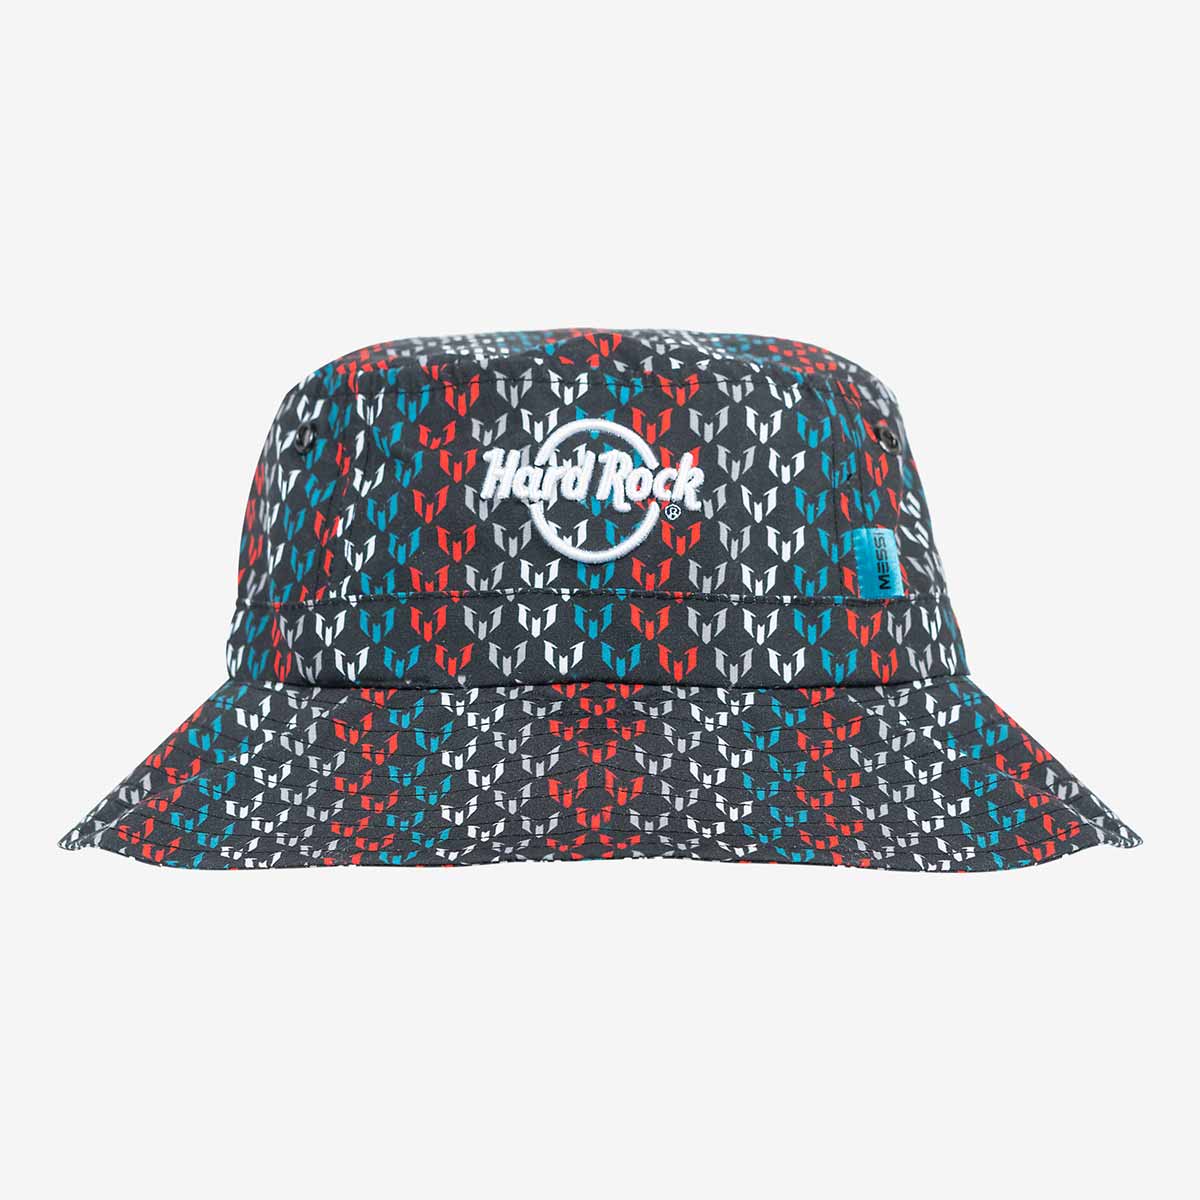 Messi x Hard Rock Bucket Hat with Repeat Print image number 1